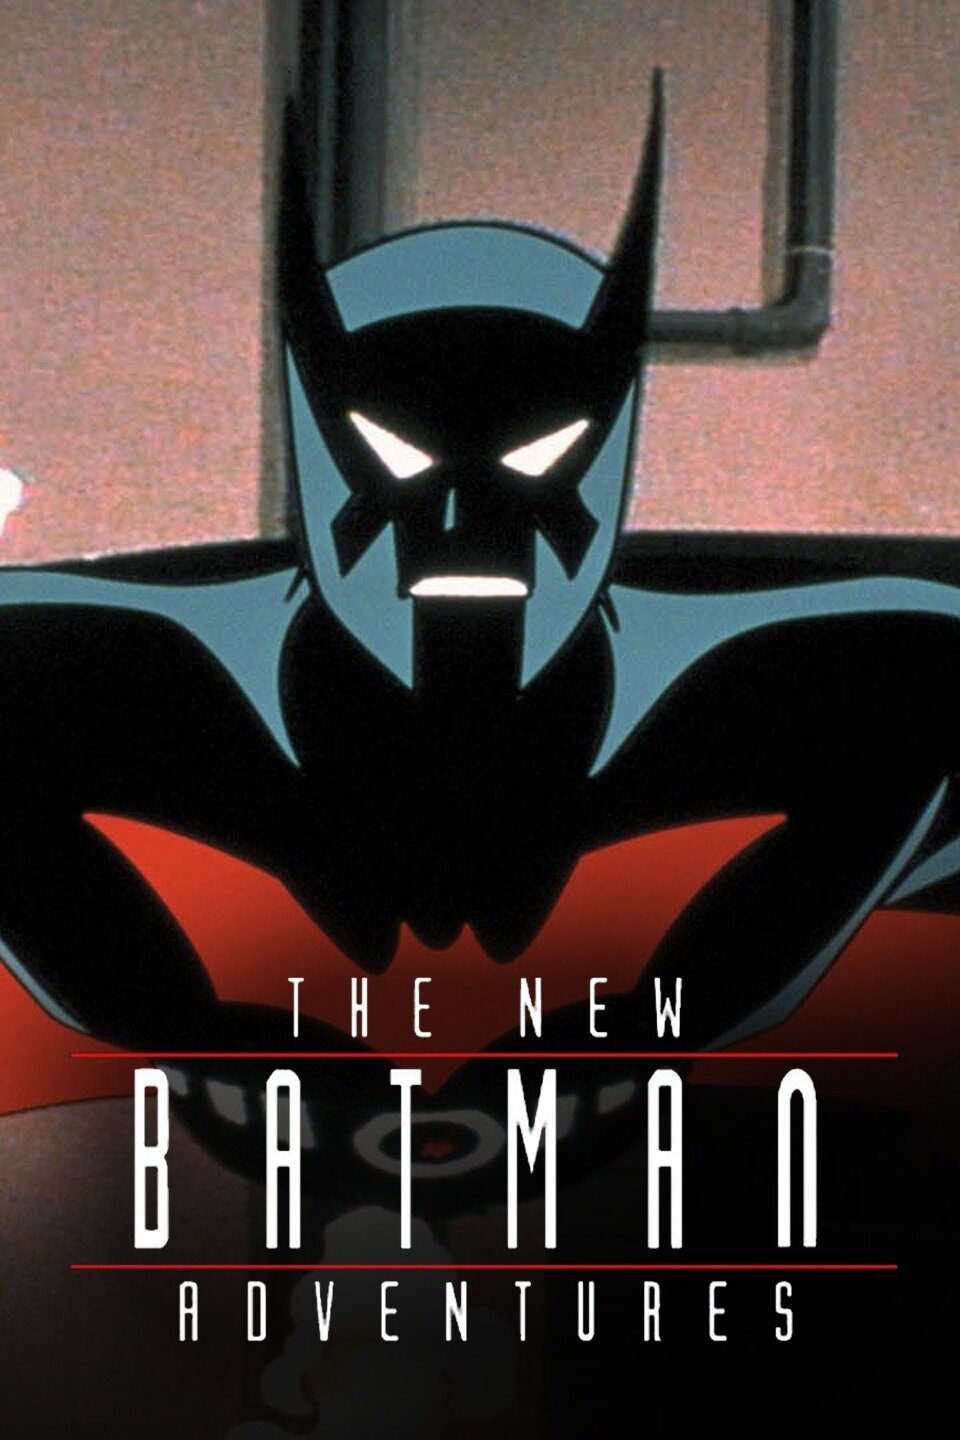 Batman: The Animated Series - Rotten Tomatoes